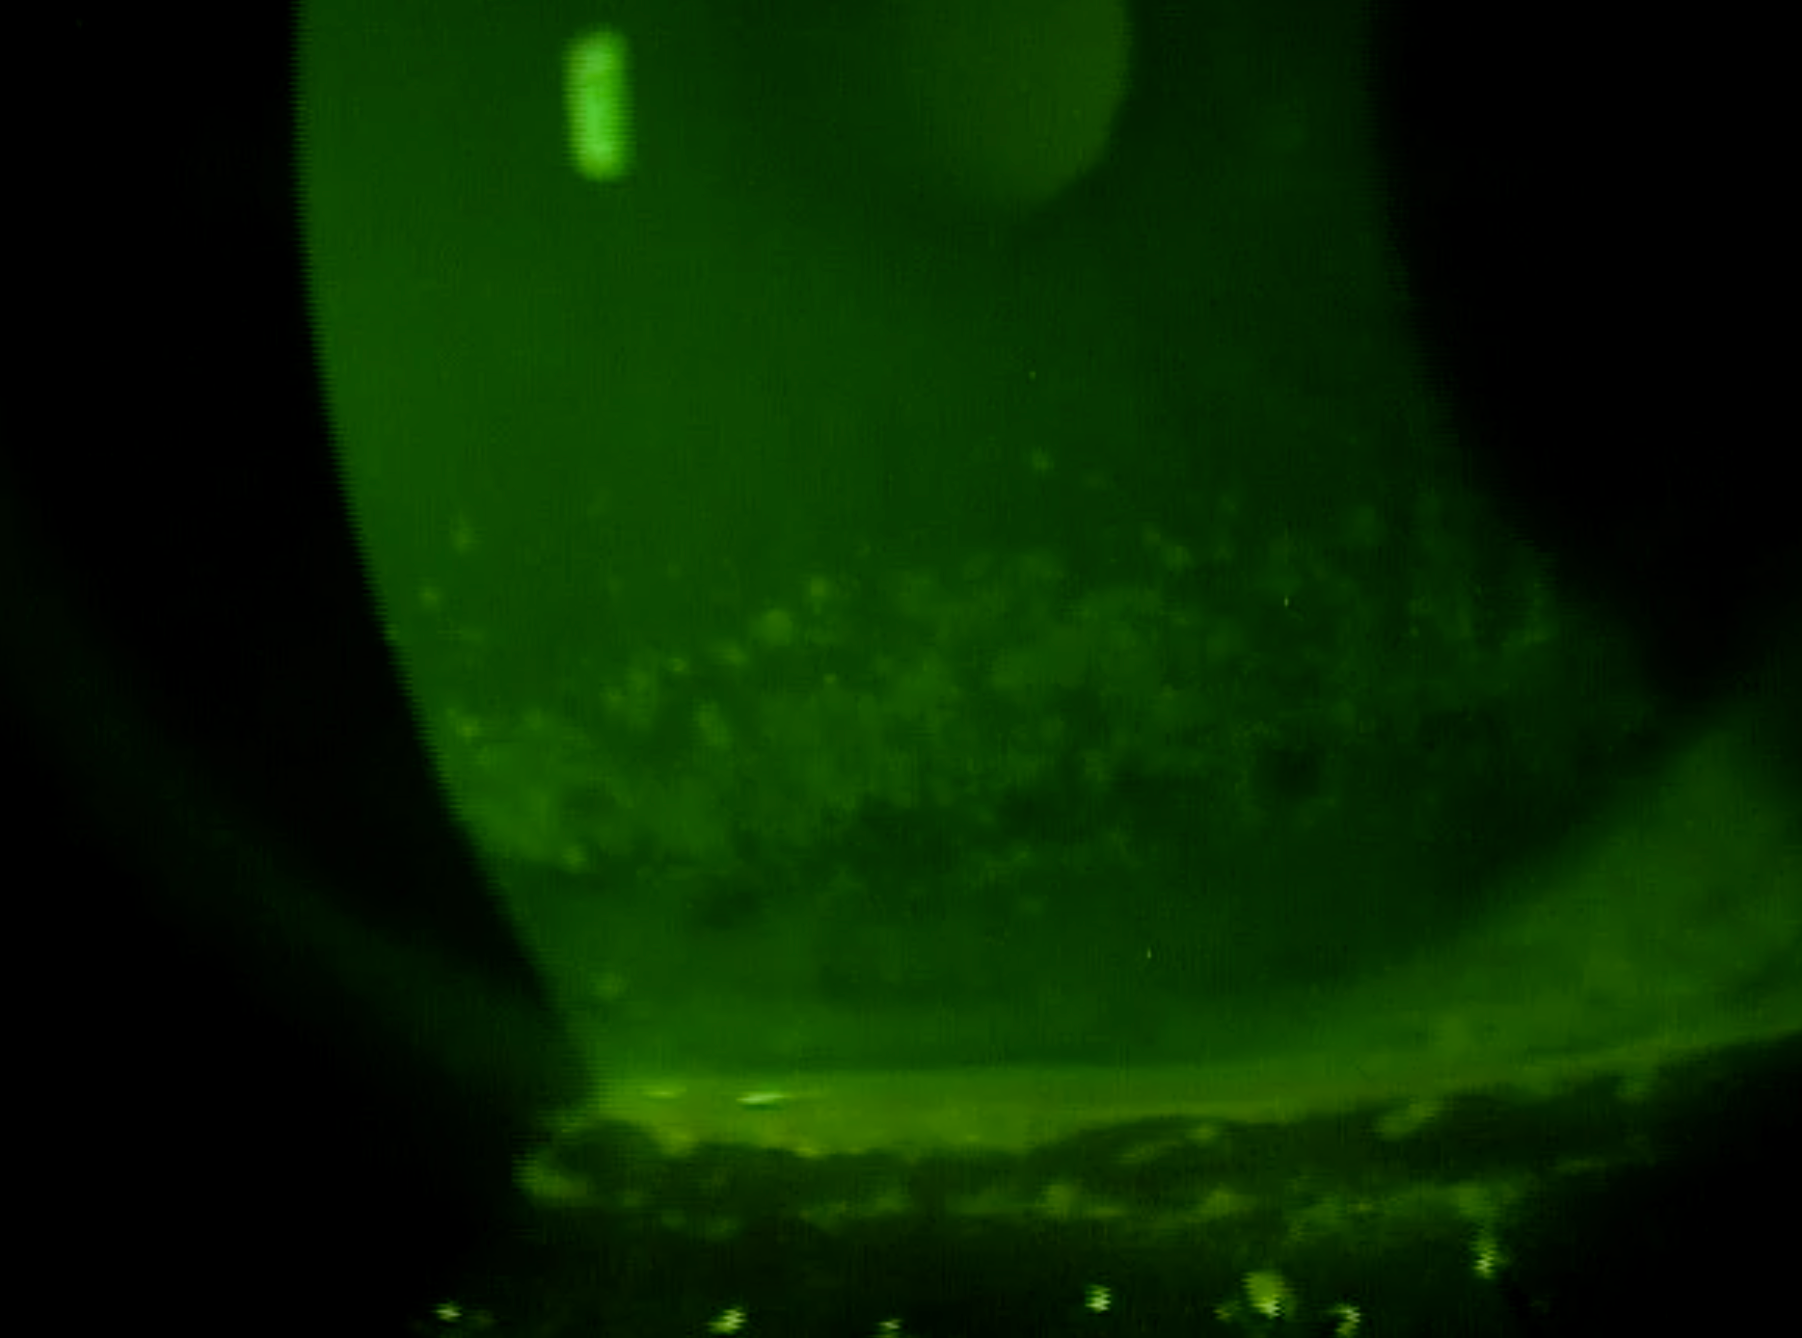 Slit lamp image showing potential signs of TED; patient should be referred to a TED specialist